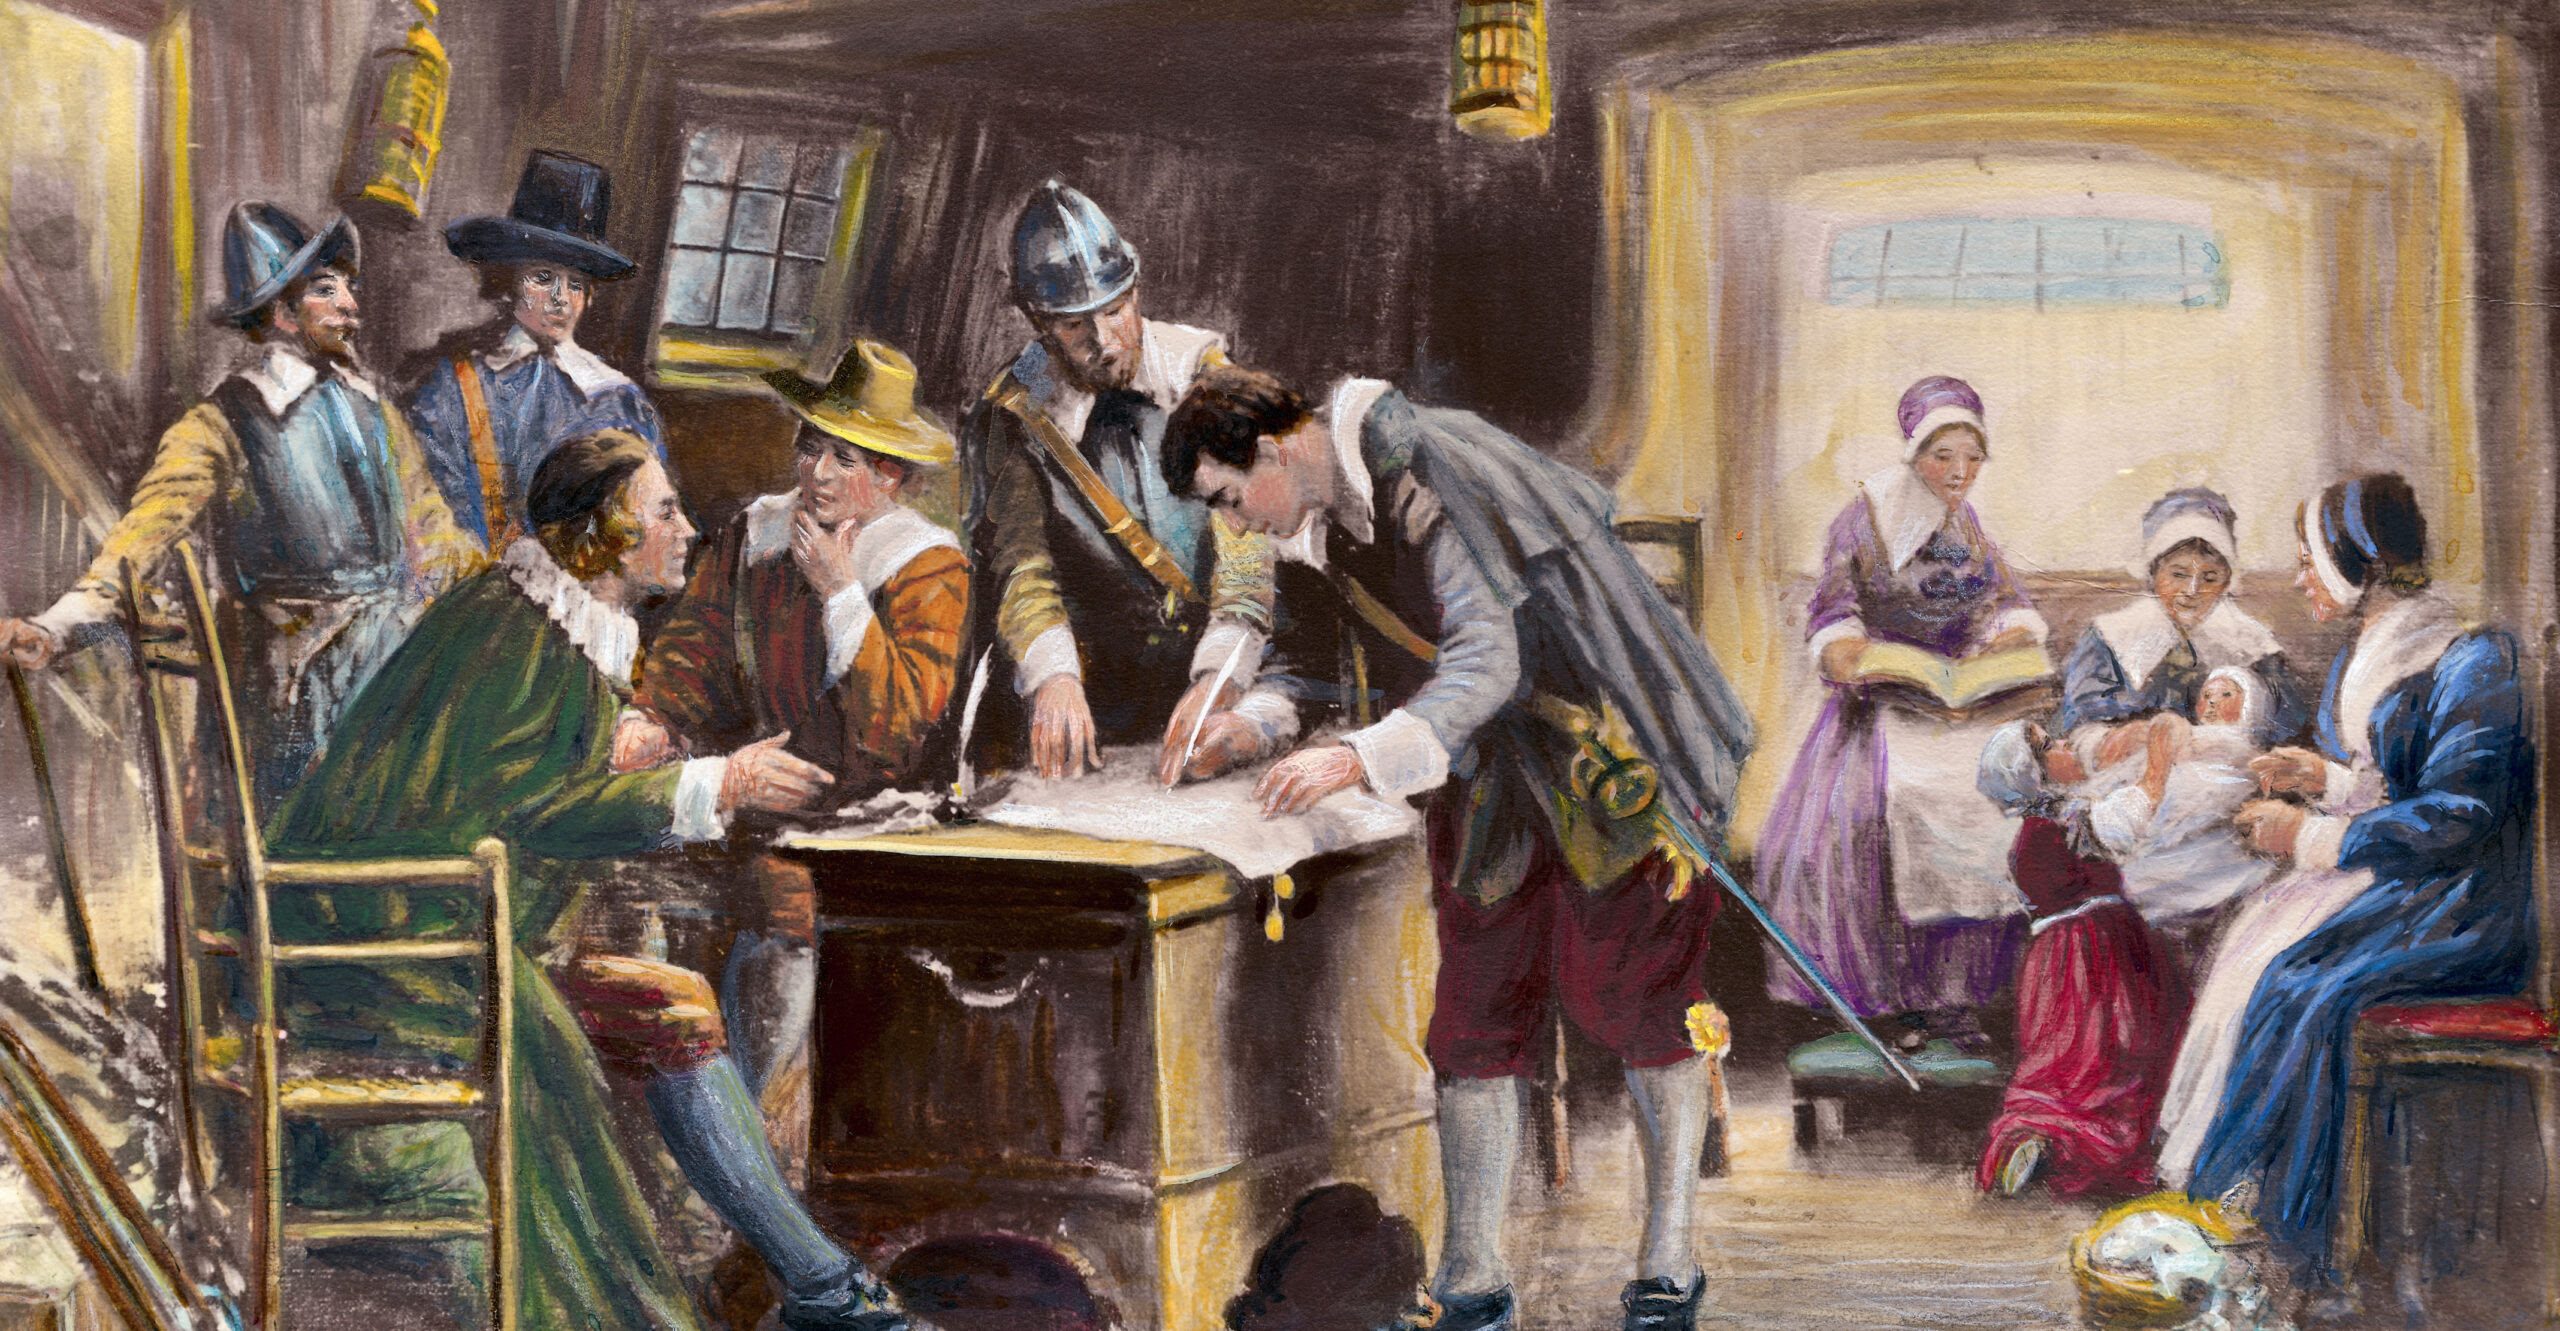 How Mayflower Compact Influenced the American Concept of Rule of Law